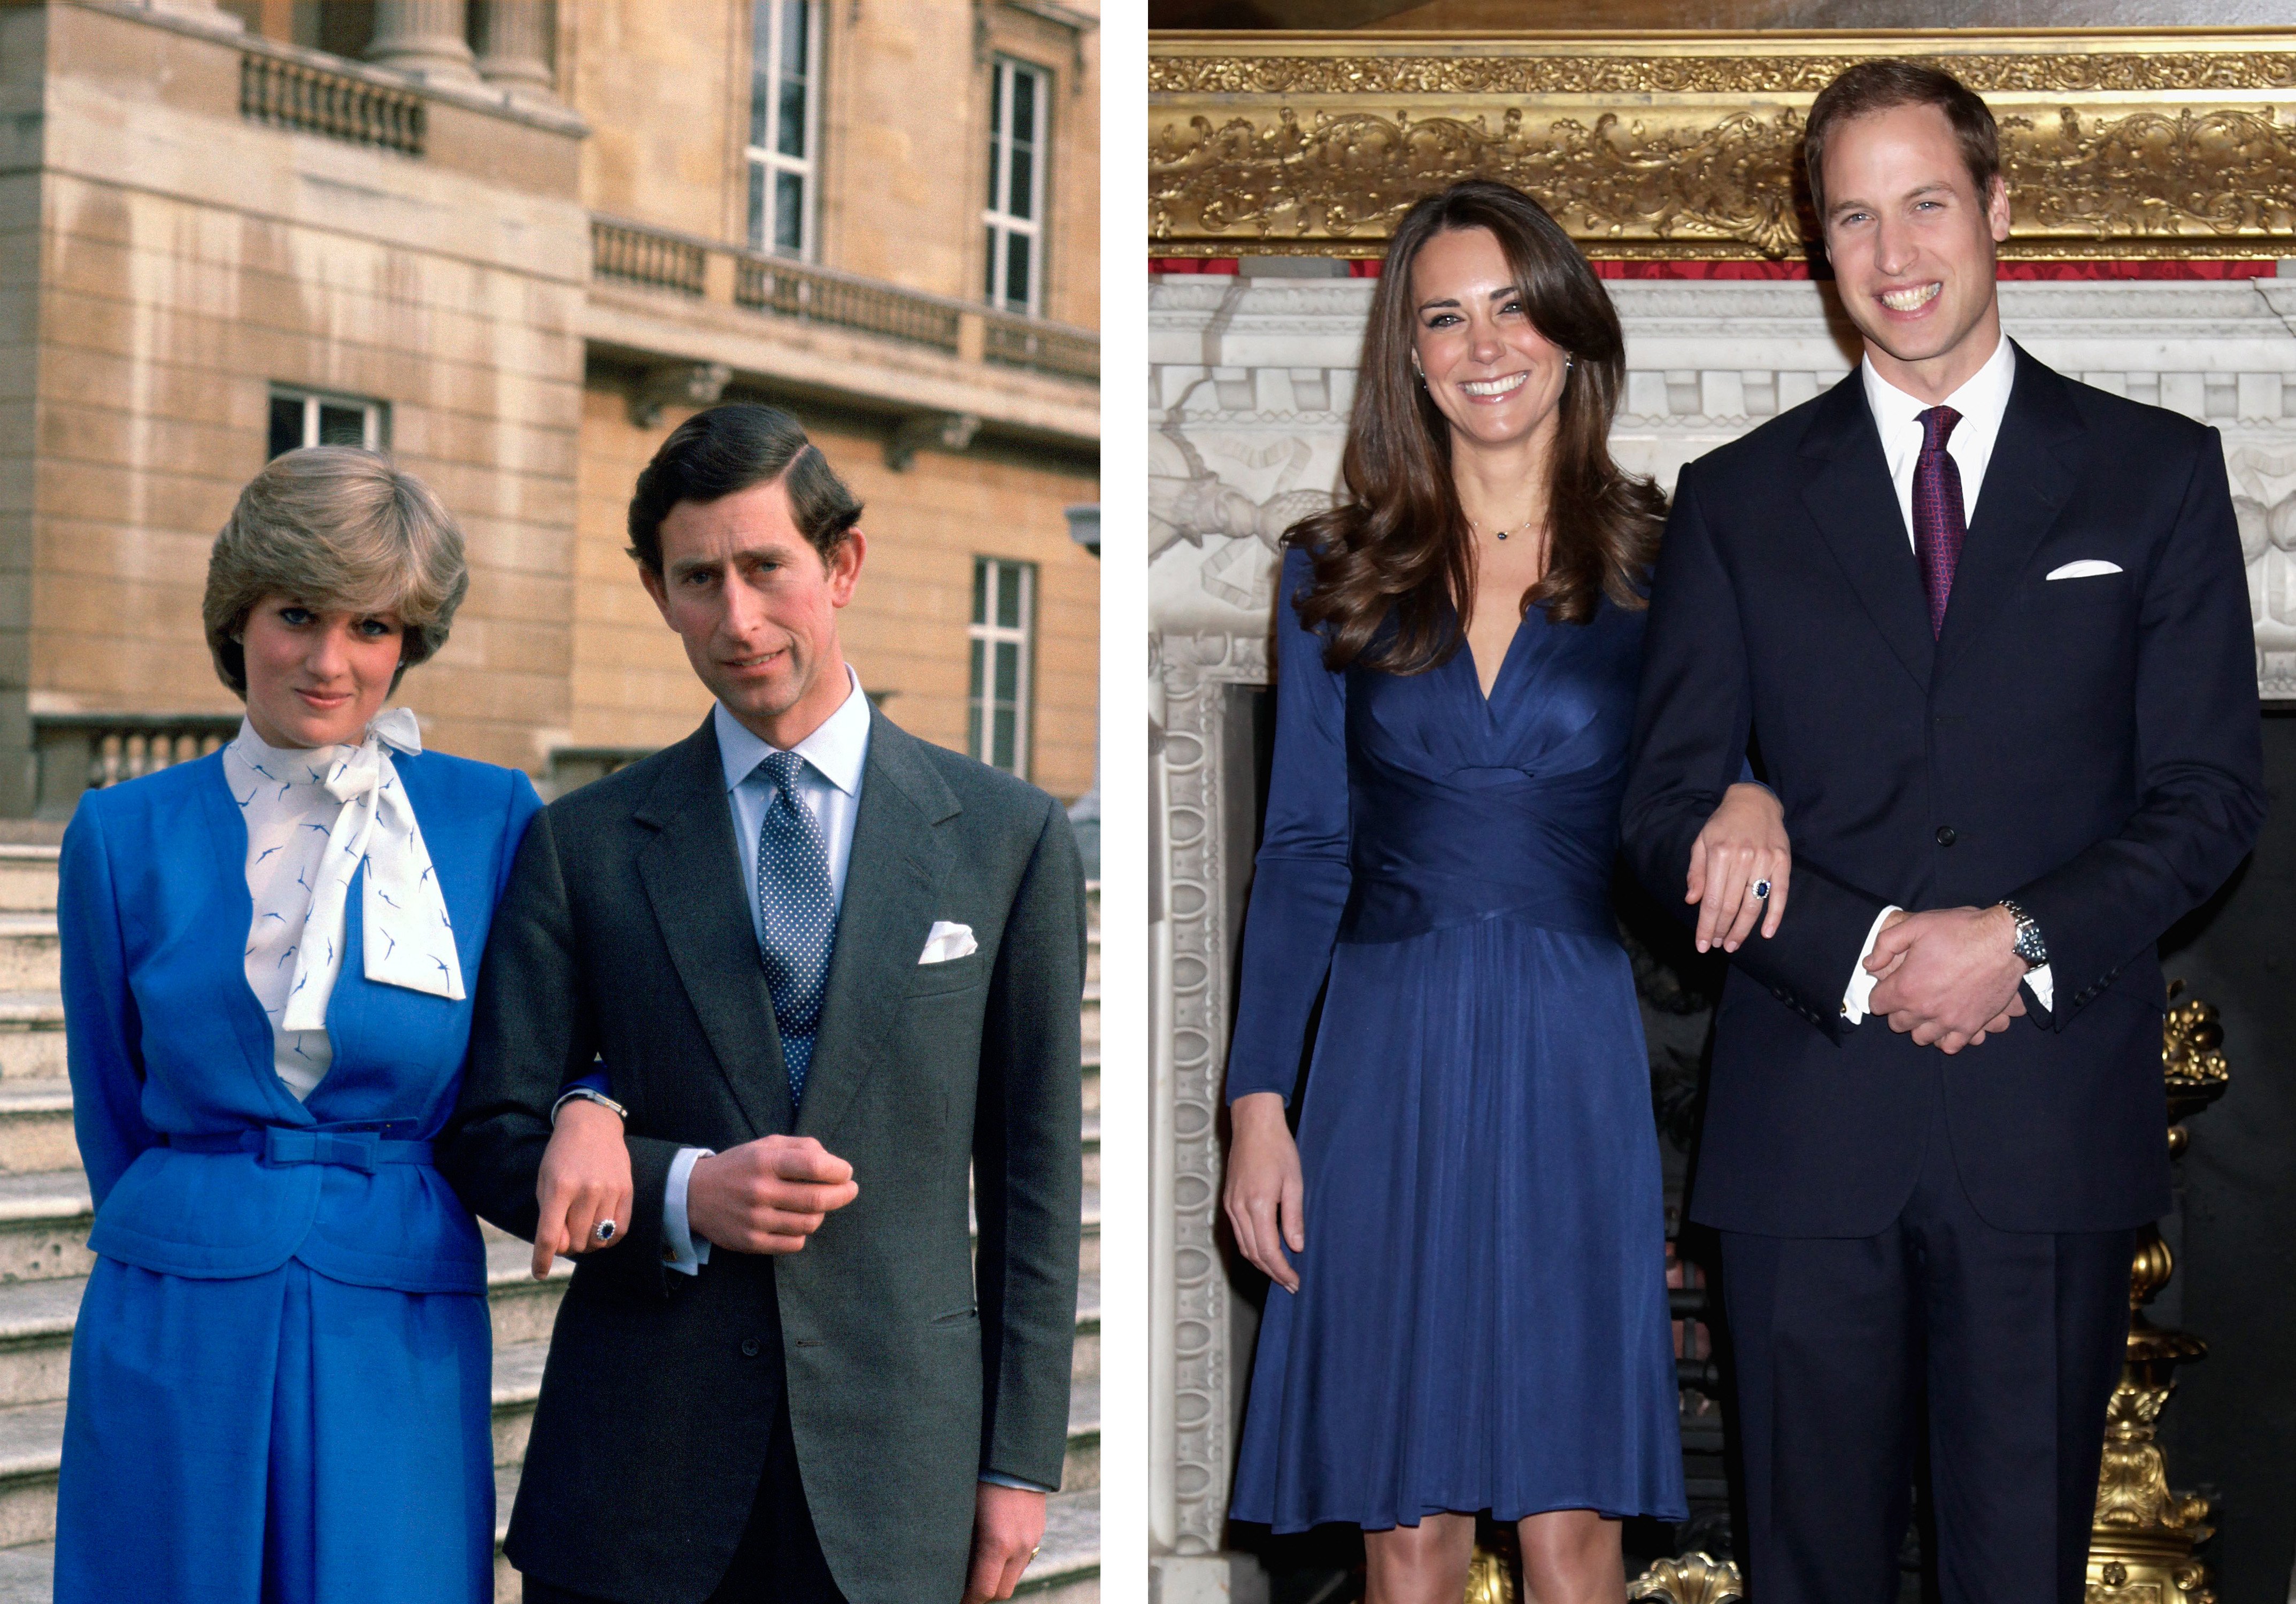 Photo comparing the engagement announcements of Prince Charles to Princess Diana and Prince William to Kate Middleton | Source: Getty Images